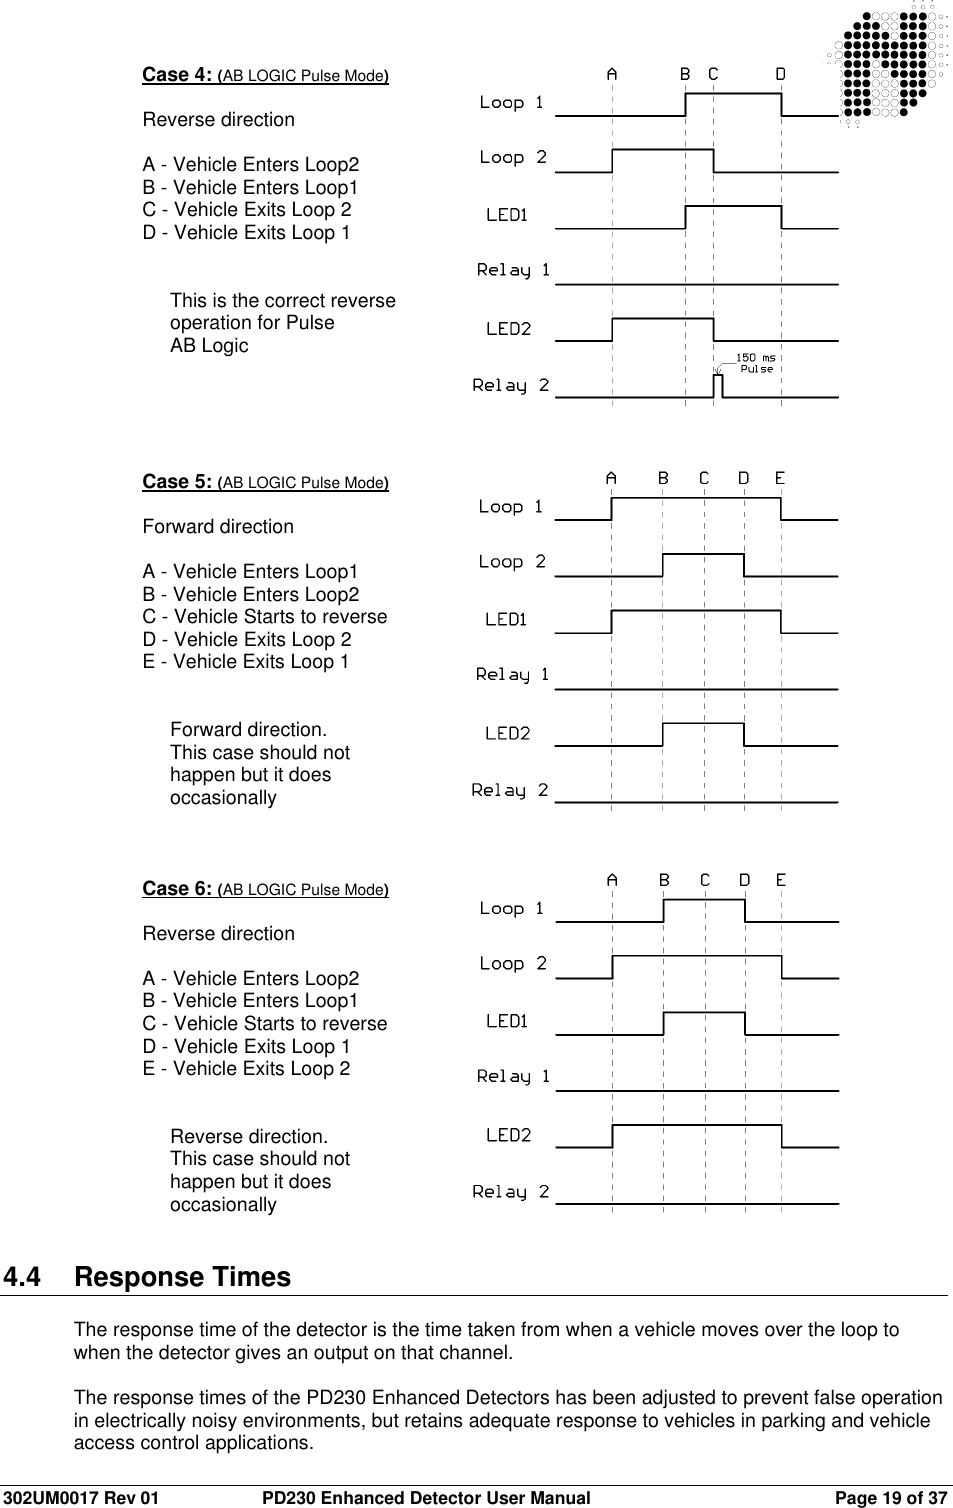  302UM0017 Rev 01  PD230 Enhanced Detector User Manual   Page 19 of 37  Case 4: (AB LOGIC Pulse Mode)  Reverse direction  A - Vehicle Enters Loop2 B - Vehicle Enters Loop1 C - Vehicle Exits Loop 2 D - Vehicle Exits Loop 1   This is the correct reverse operation for Pulse AB Logic      Case 5: (AB LOGIC Pulse Mode)  Forward direction  A - Vehicle Enters Loop1 B - Vehicle Enters Loop2 C - Vehicle Starts to reverse D - Vehicle Exits Loop 2 E - Vehicle Exits Loop 1   Forward direction.  This case should not  happen but it does  occasionally    Case 6: (AB LOGIC Pulse Mode)  Reverse direction  A - Vehicle Enters Loop2 B - Vehicle Enters Loop1 C - Vehicle Starts to reverse D - Vehicle Exits Loop 1 E - Vehicle Exits Loop 2   Reverse direction.  This case should not  happen but it does  occasionally   4.4  Response Times  The response time of the detector is the time taken from when a vehicle moves over the loop to when the detector gives an output on that channel.    The response times of the PD230 Enhanced Detectors has been adjusted to prevent false operation in electrically noisy environments, but retains adequate response to vehicles in parking and vehicle access control applications. 